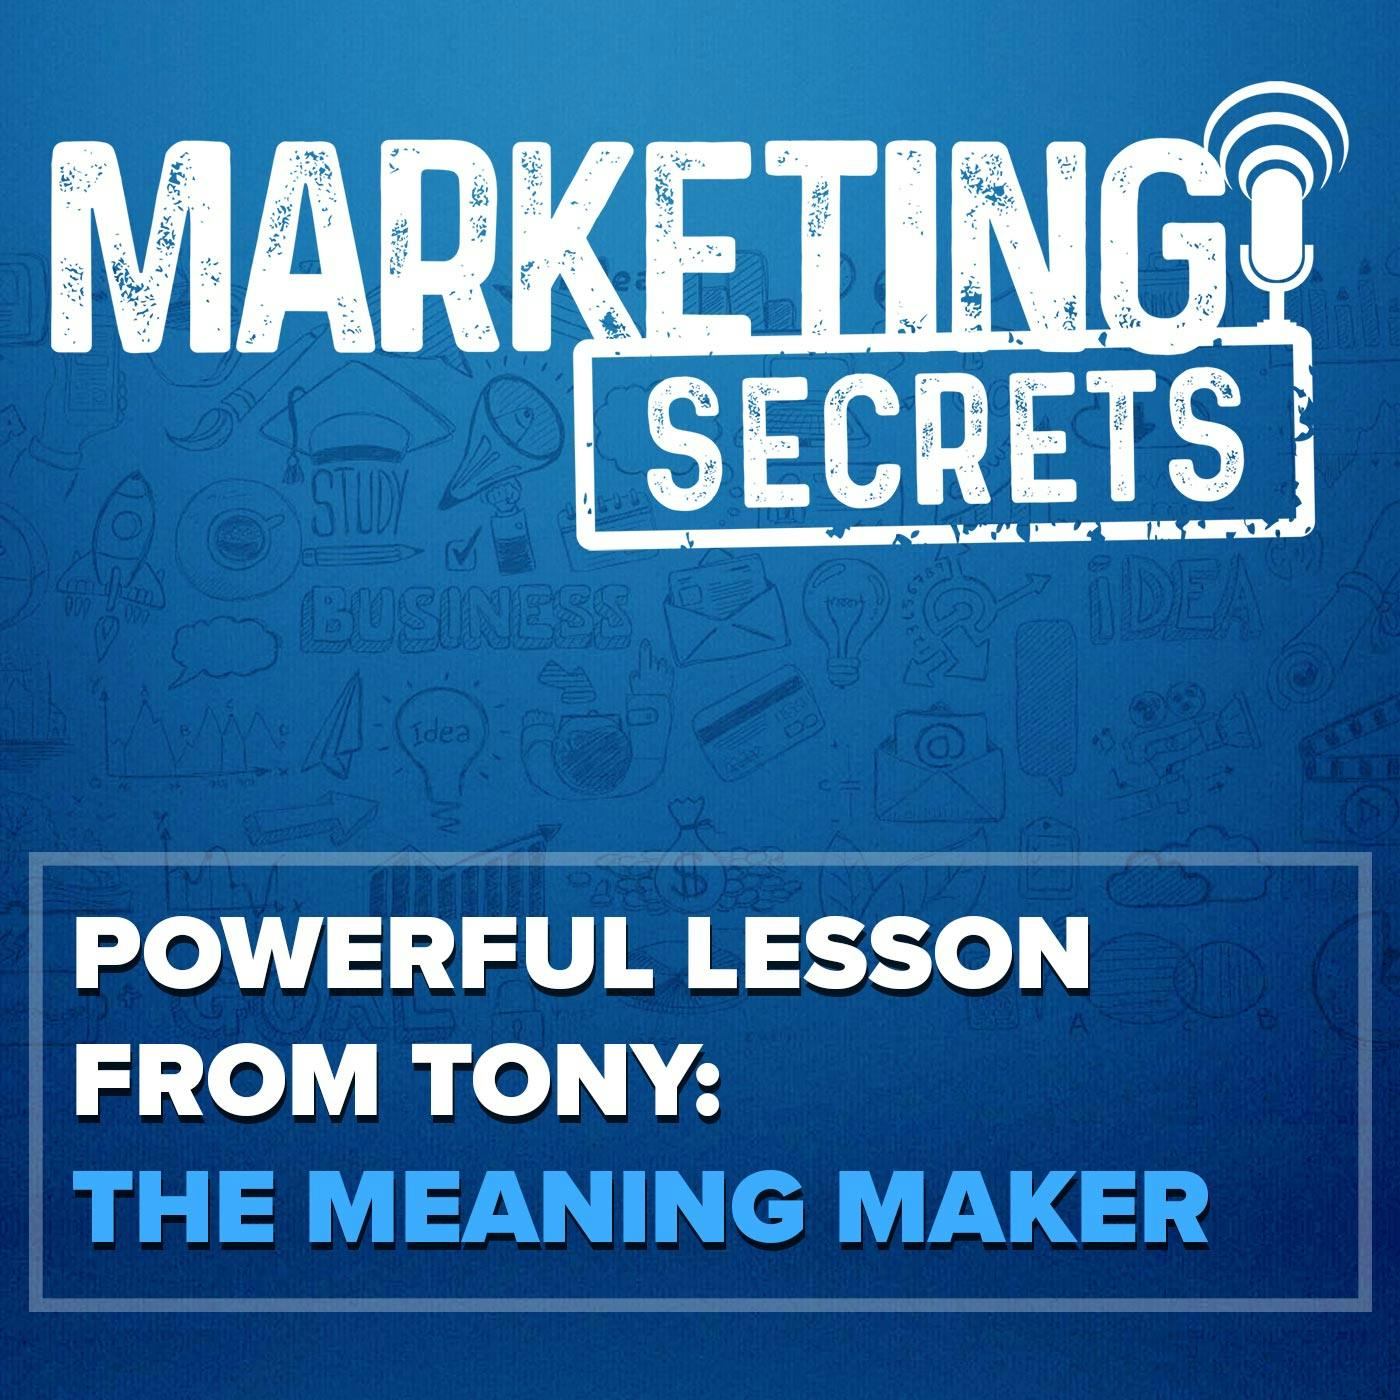 Powerful Lesson From Tony: The Meaning Maker